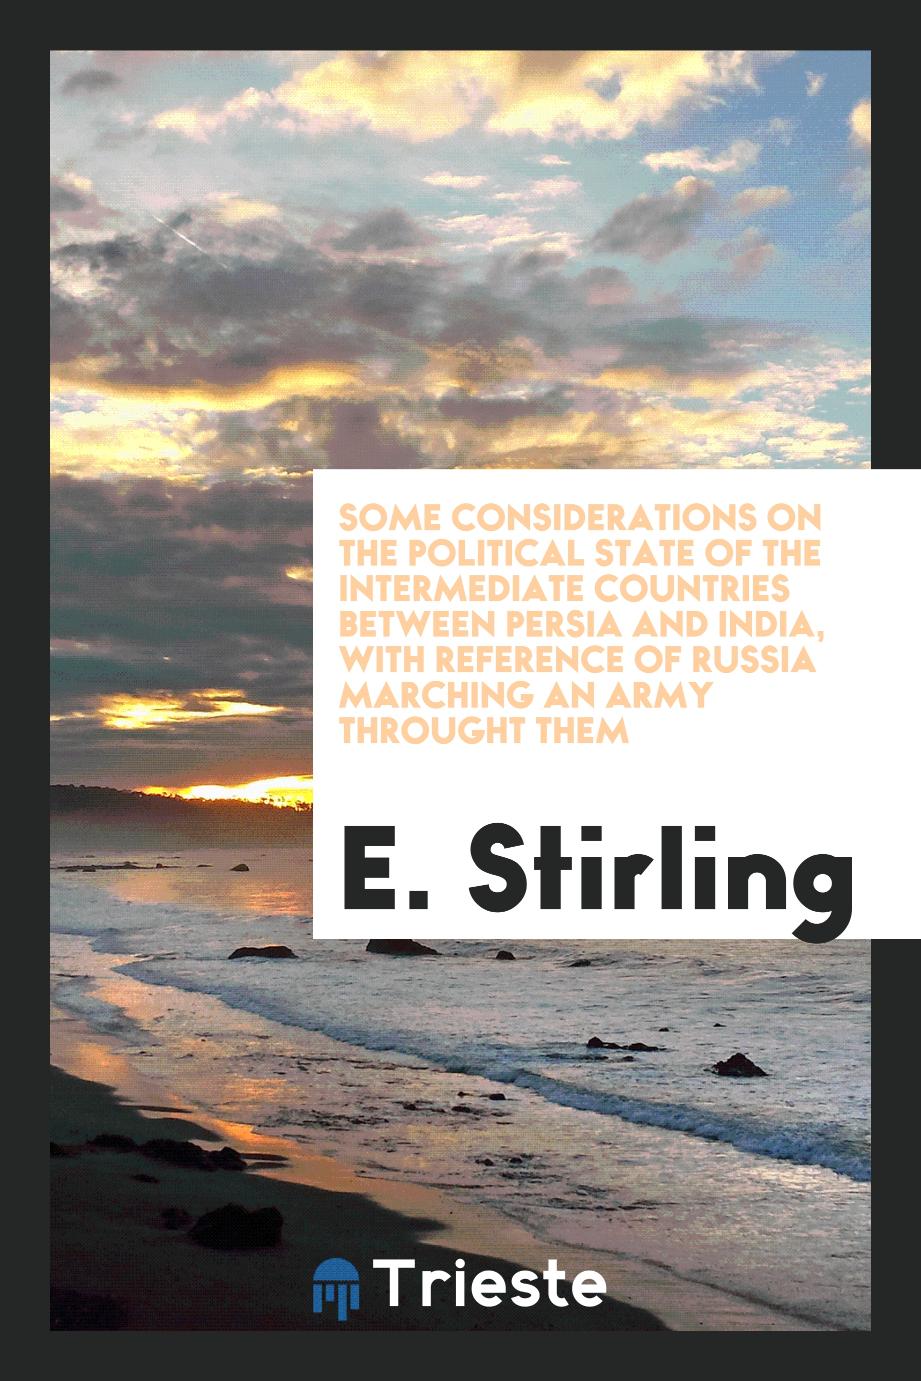 Some Considerations on the Political State of the Intermediate Countries Between Persia and India, with Reference of Russia Marching an Army Throught Them